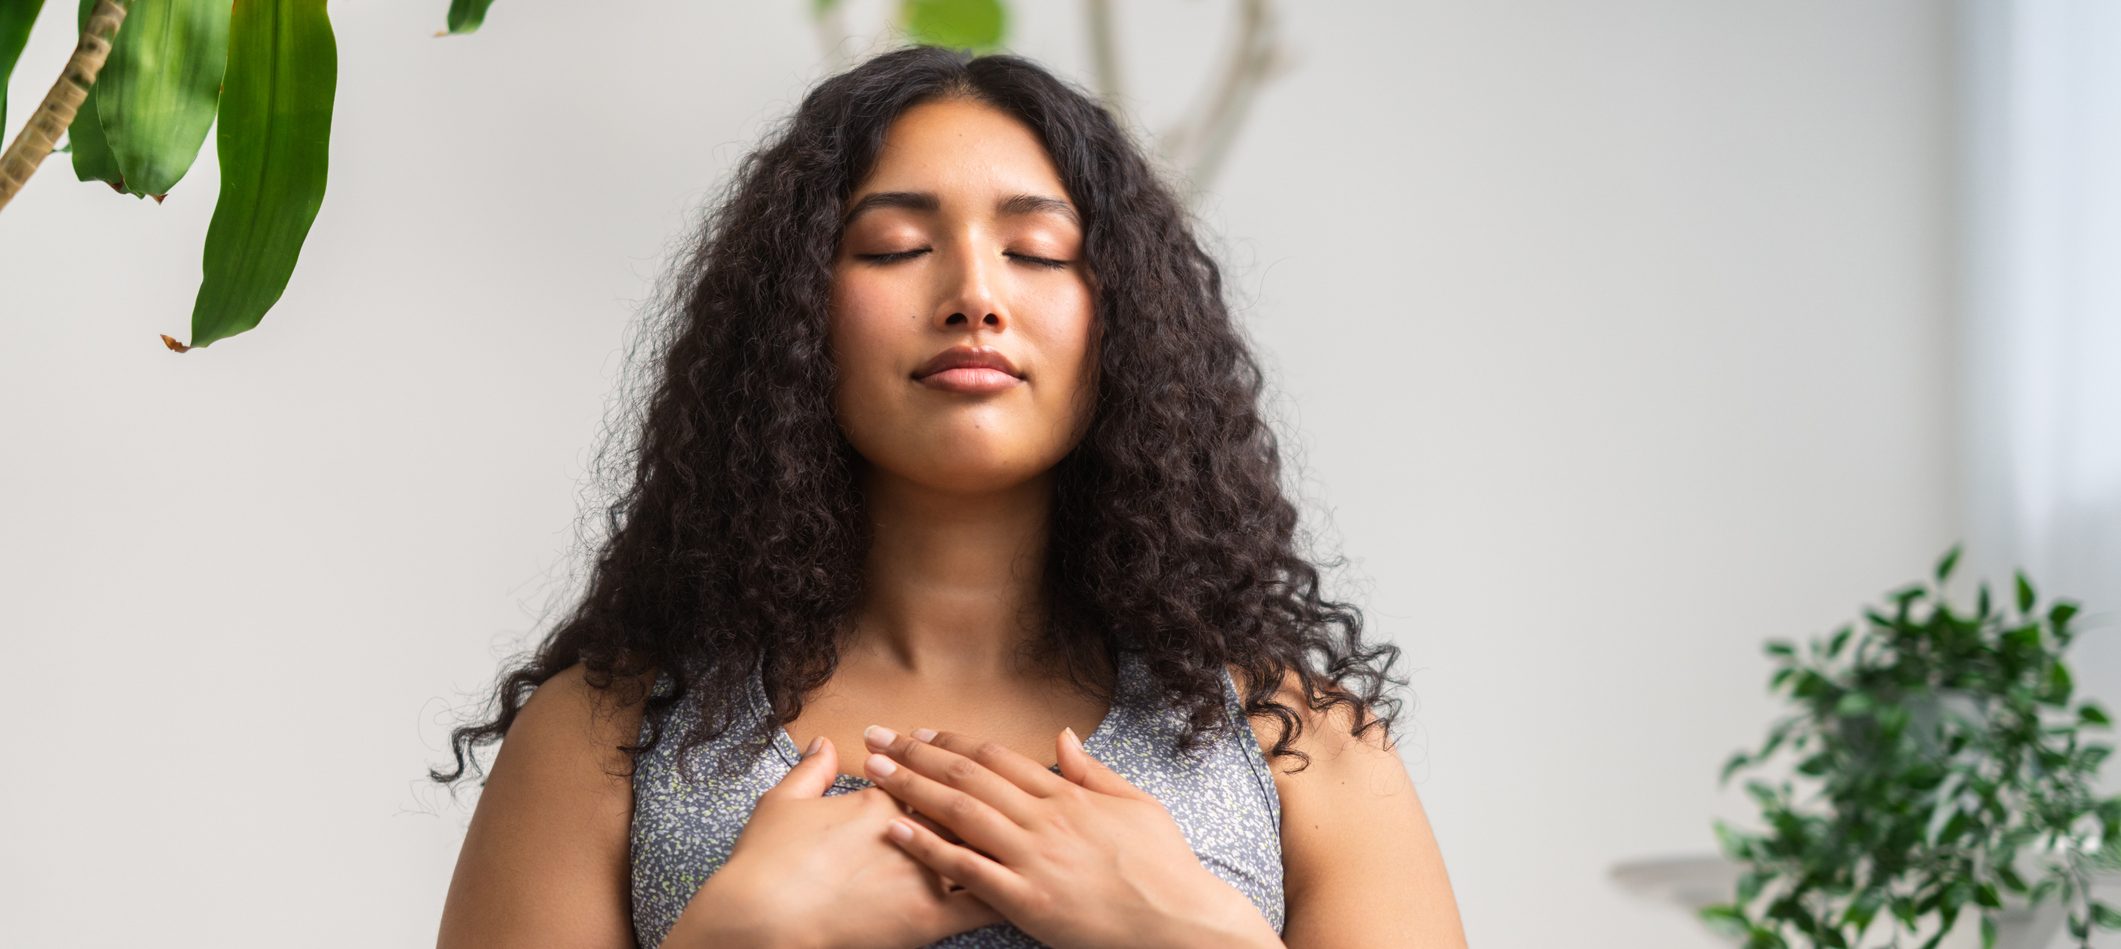 Relaxation techniques: Breath control helps quell errant stress